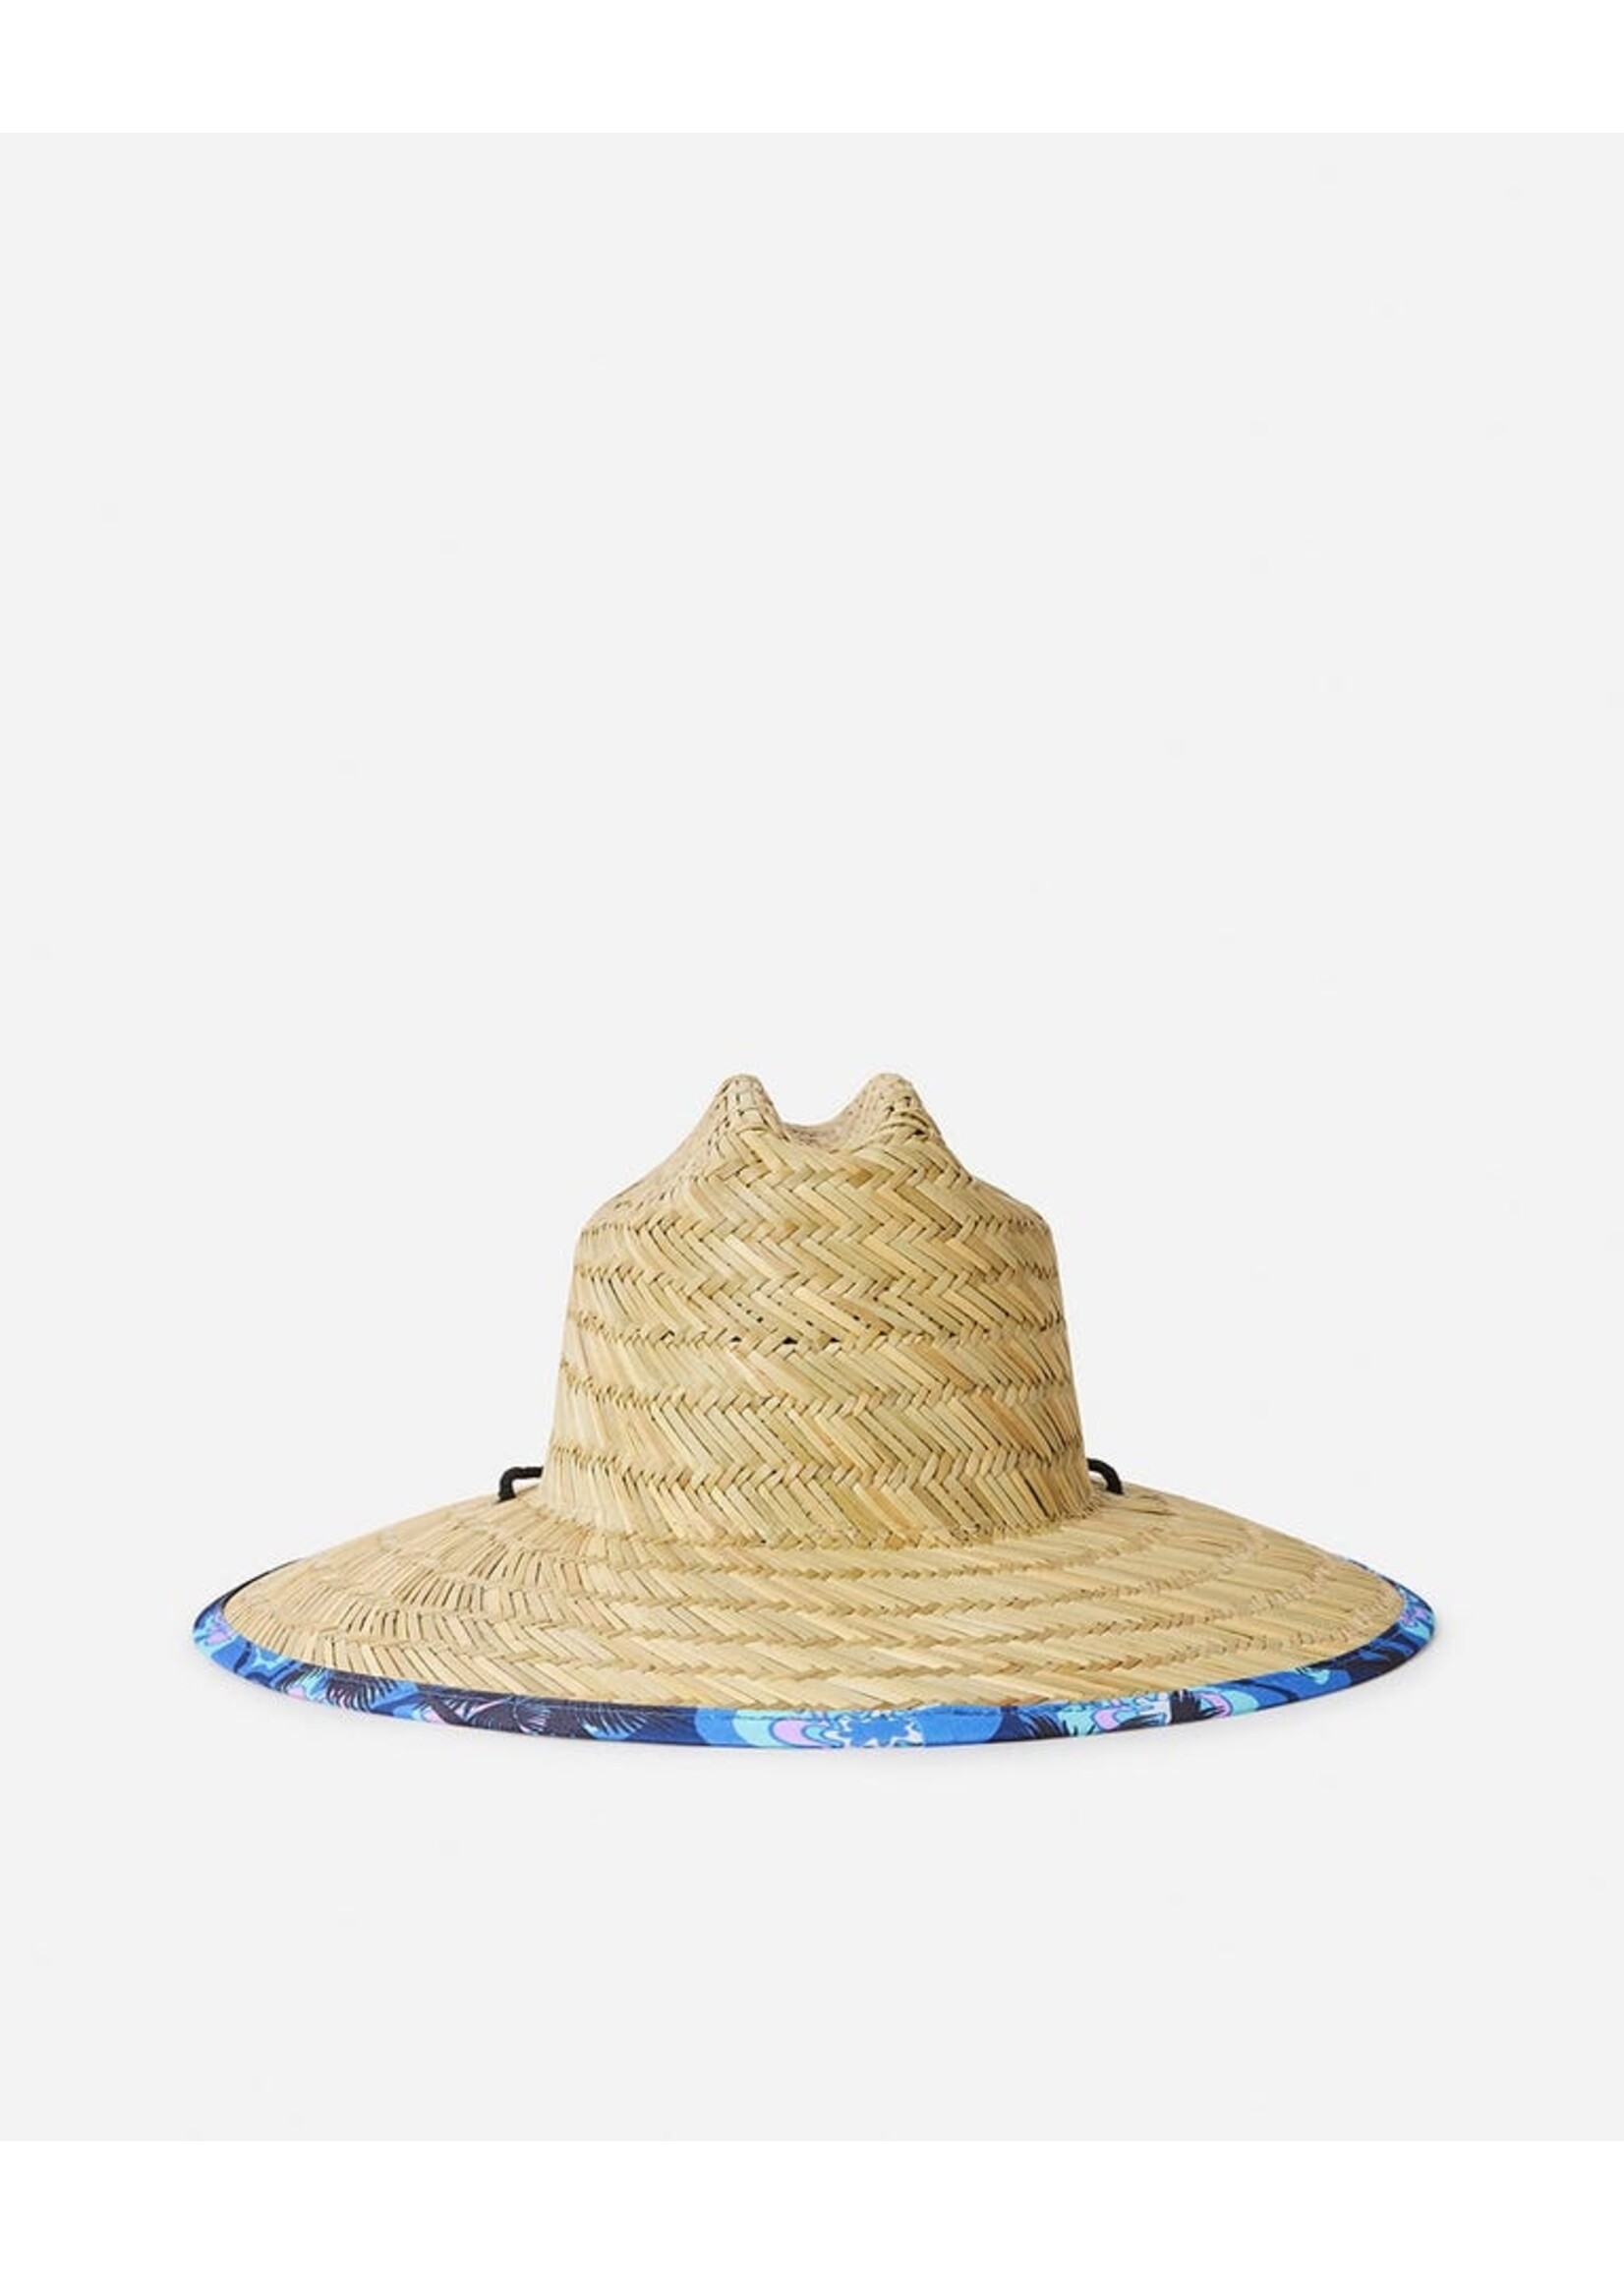 Rip Curl MIX UP STRAW HAT SM24